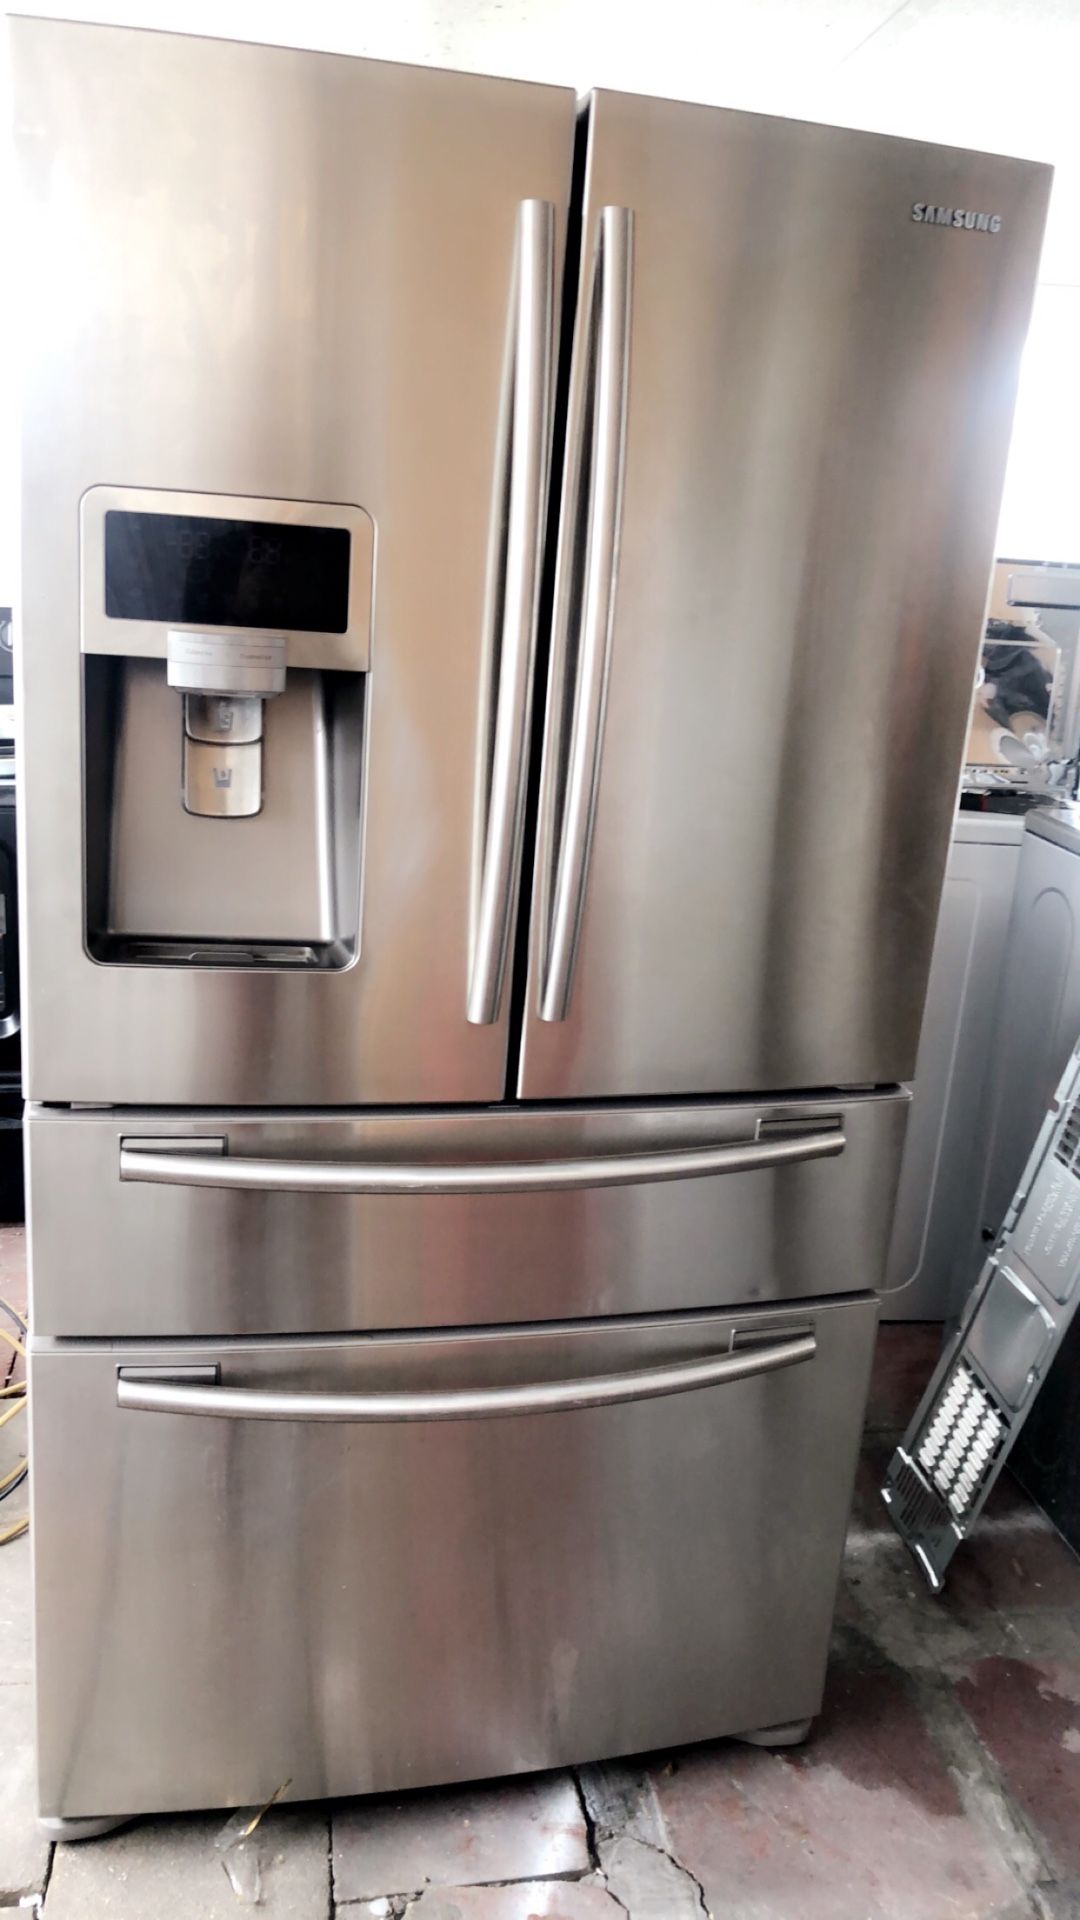 SAMSUNG STAINLESS STEEL REFRIGERATOR LIKE NEW IN PERFECT CONDITIONS WITH WARRANTY. BELLA NEVERA SAMSUNG COMO NUEVA